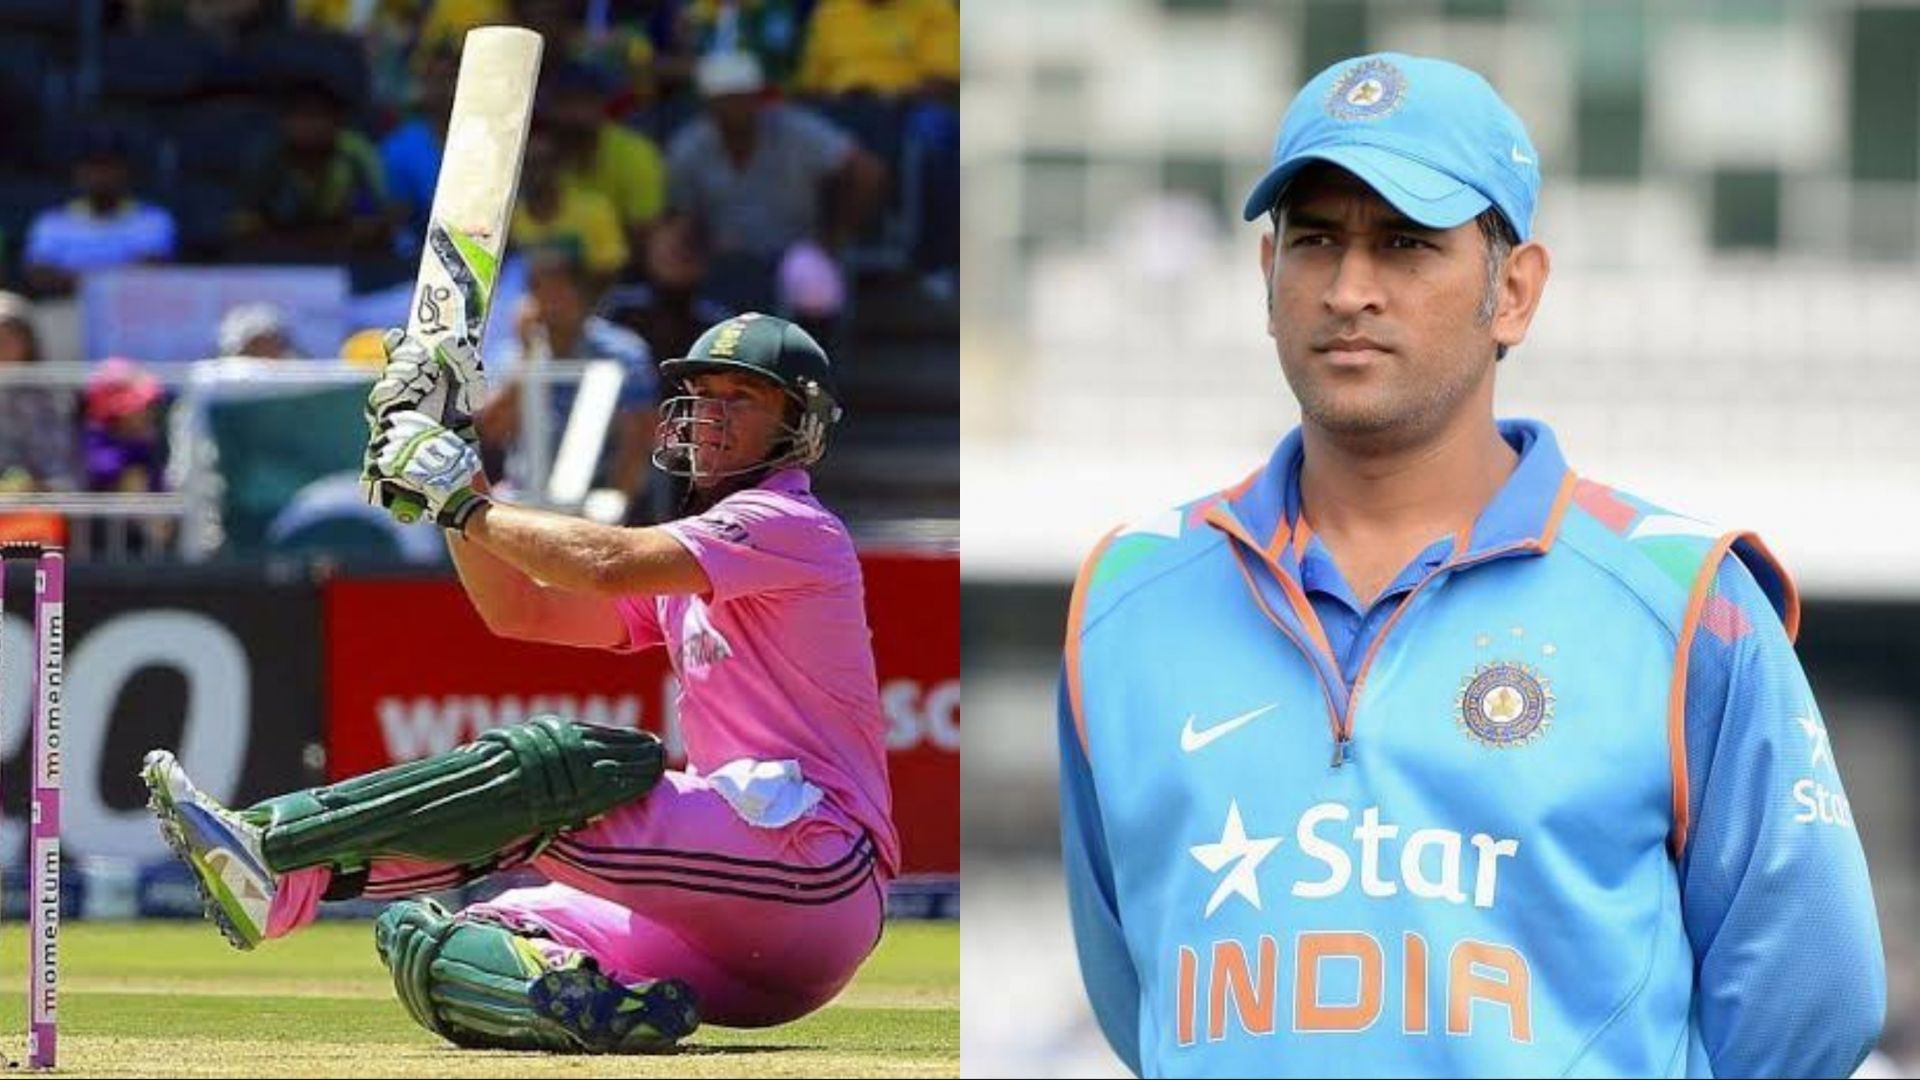 AB de Villiers (L) and MS Dhoni played in the 2018 ODI series between India and South Africa